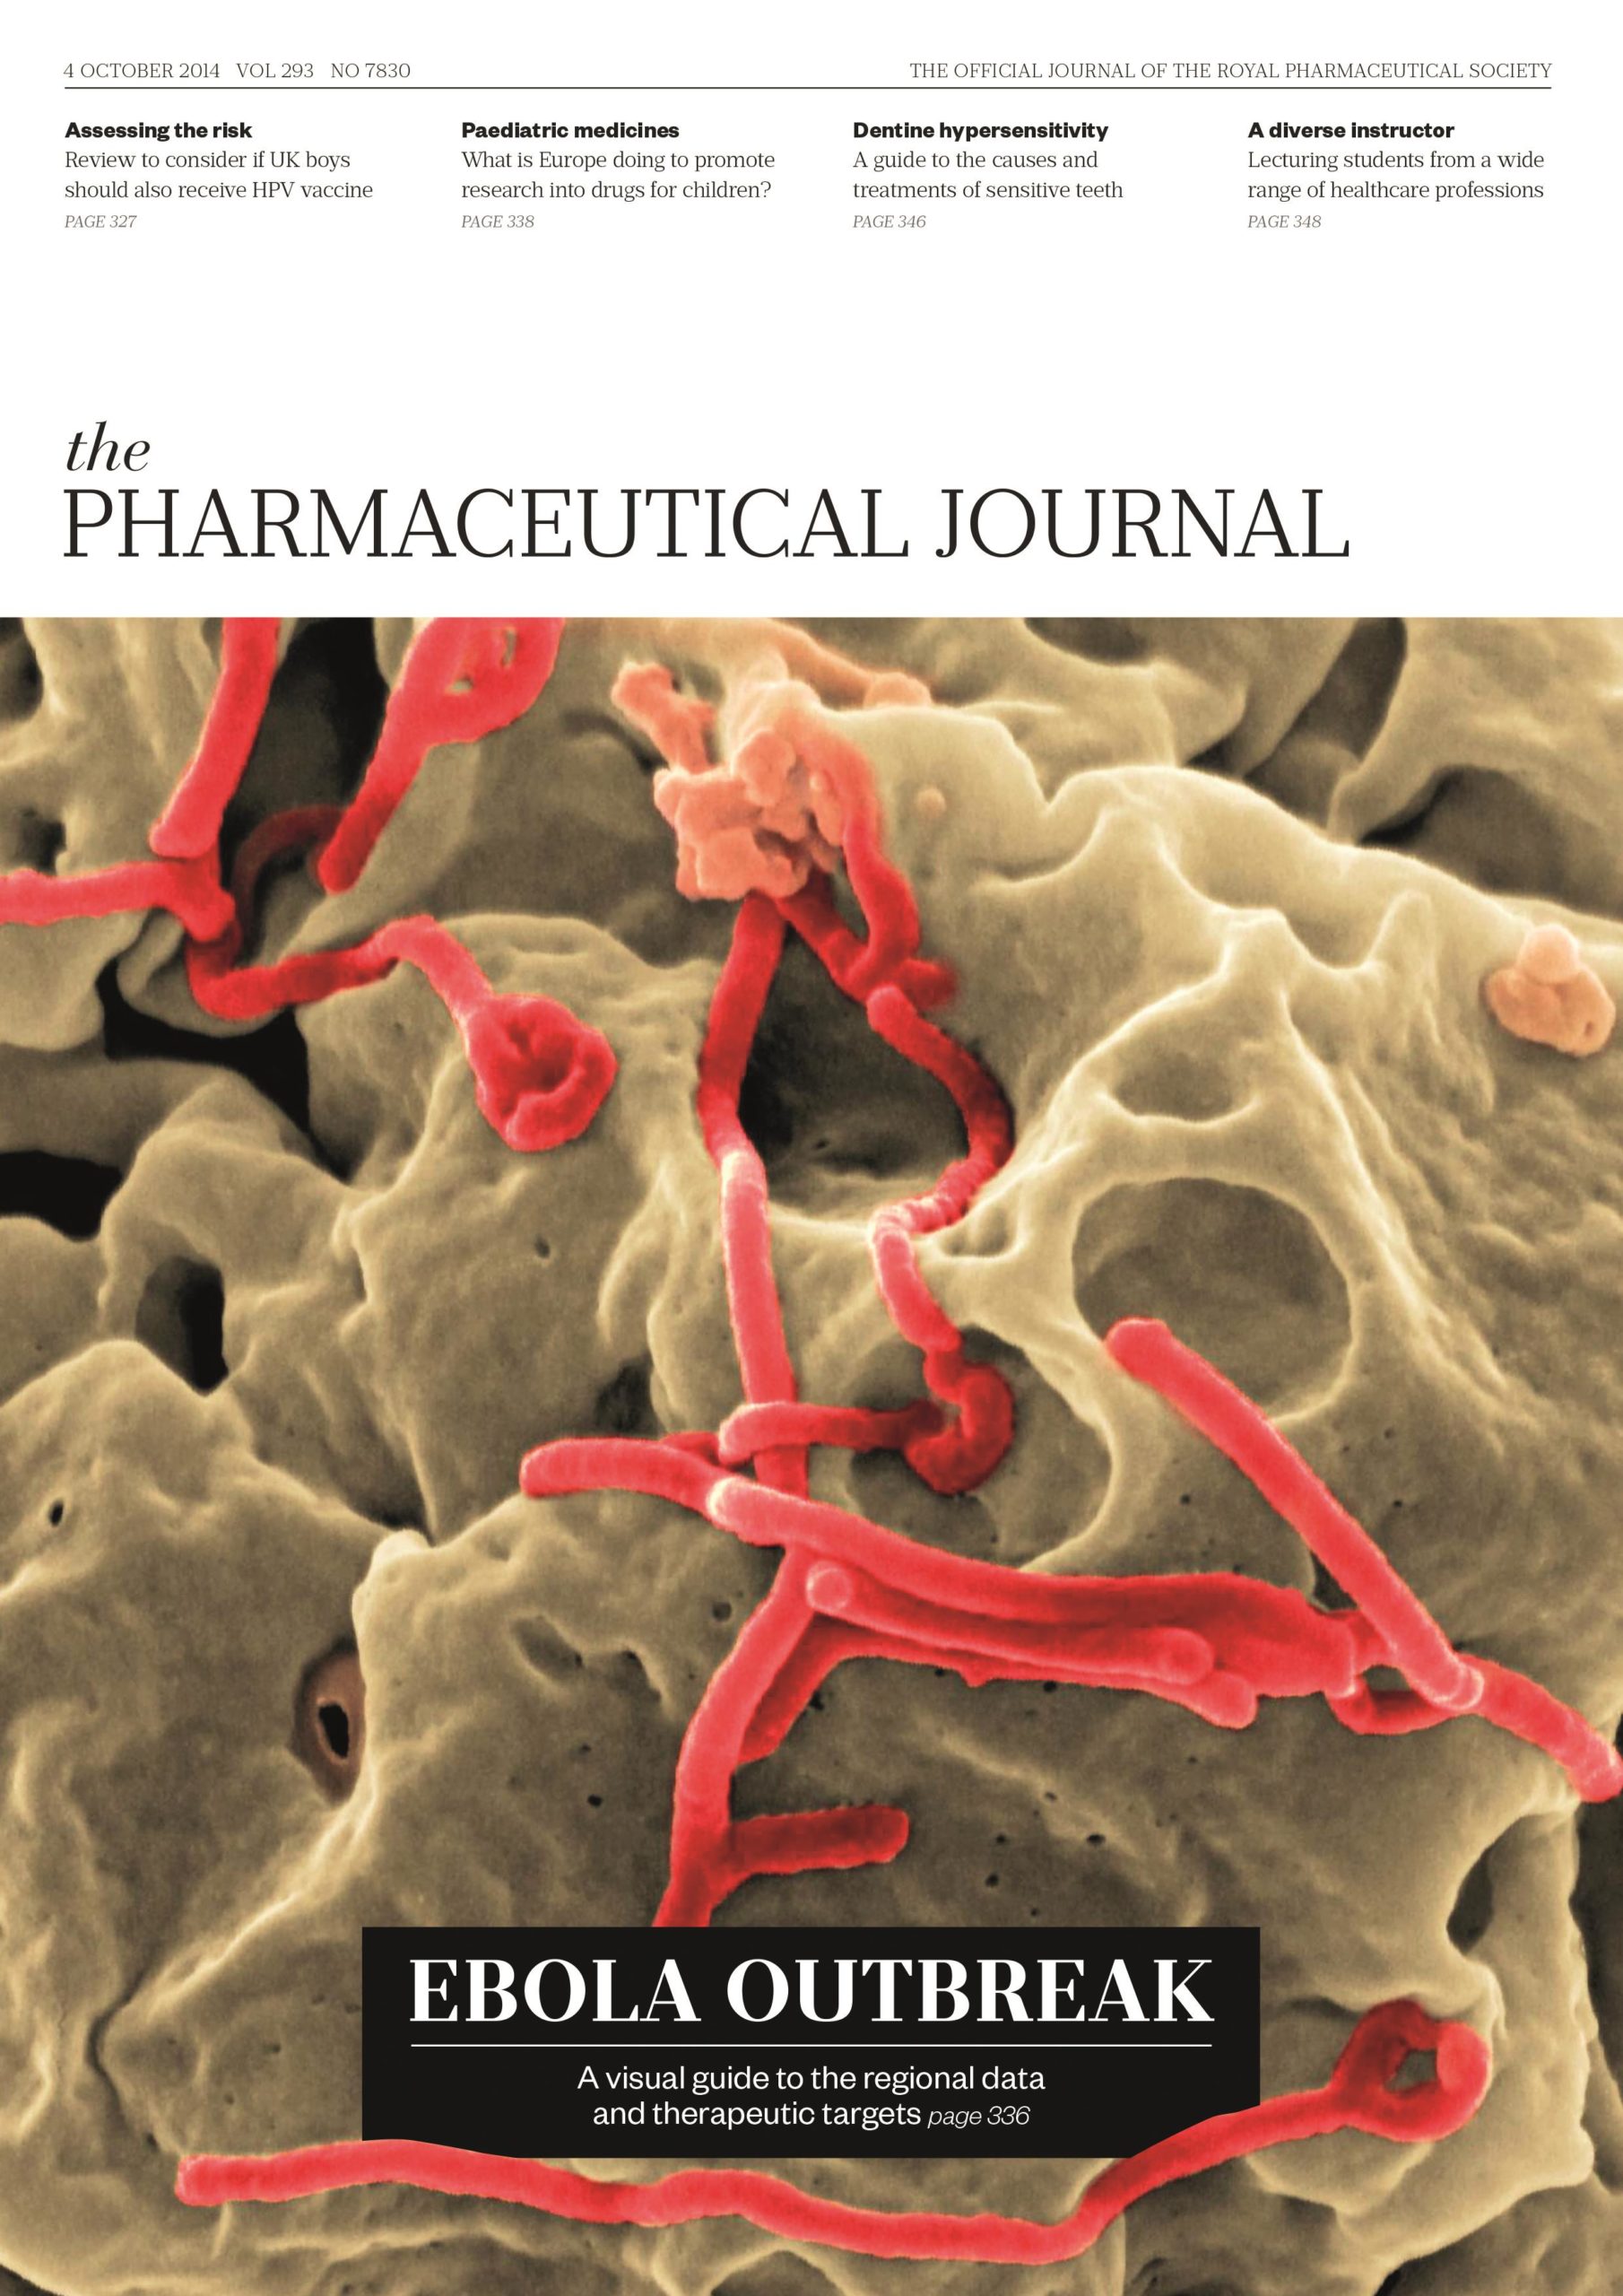 Publication issue cover for PJ, 4 October 2014, Vol 293, No 7830